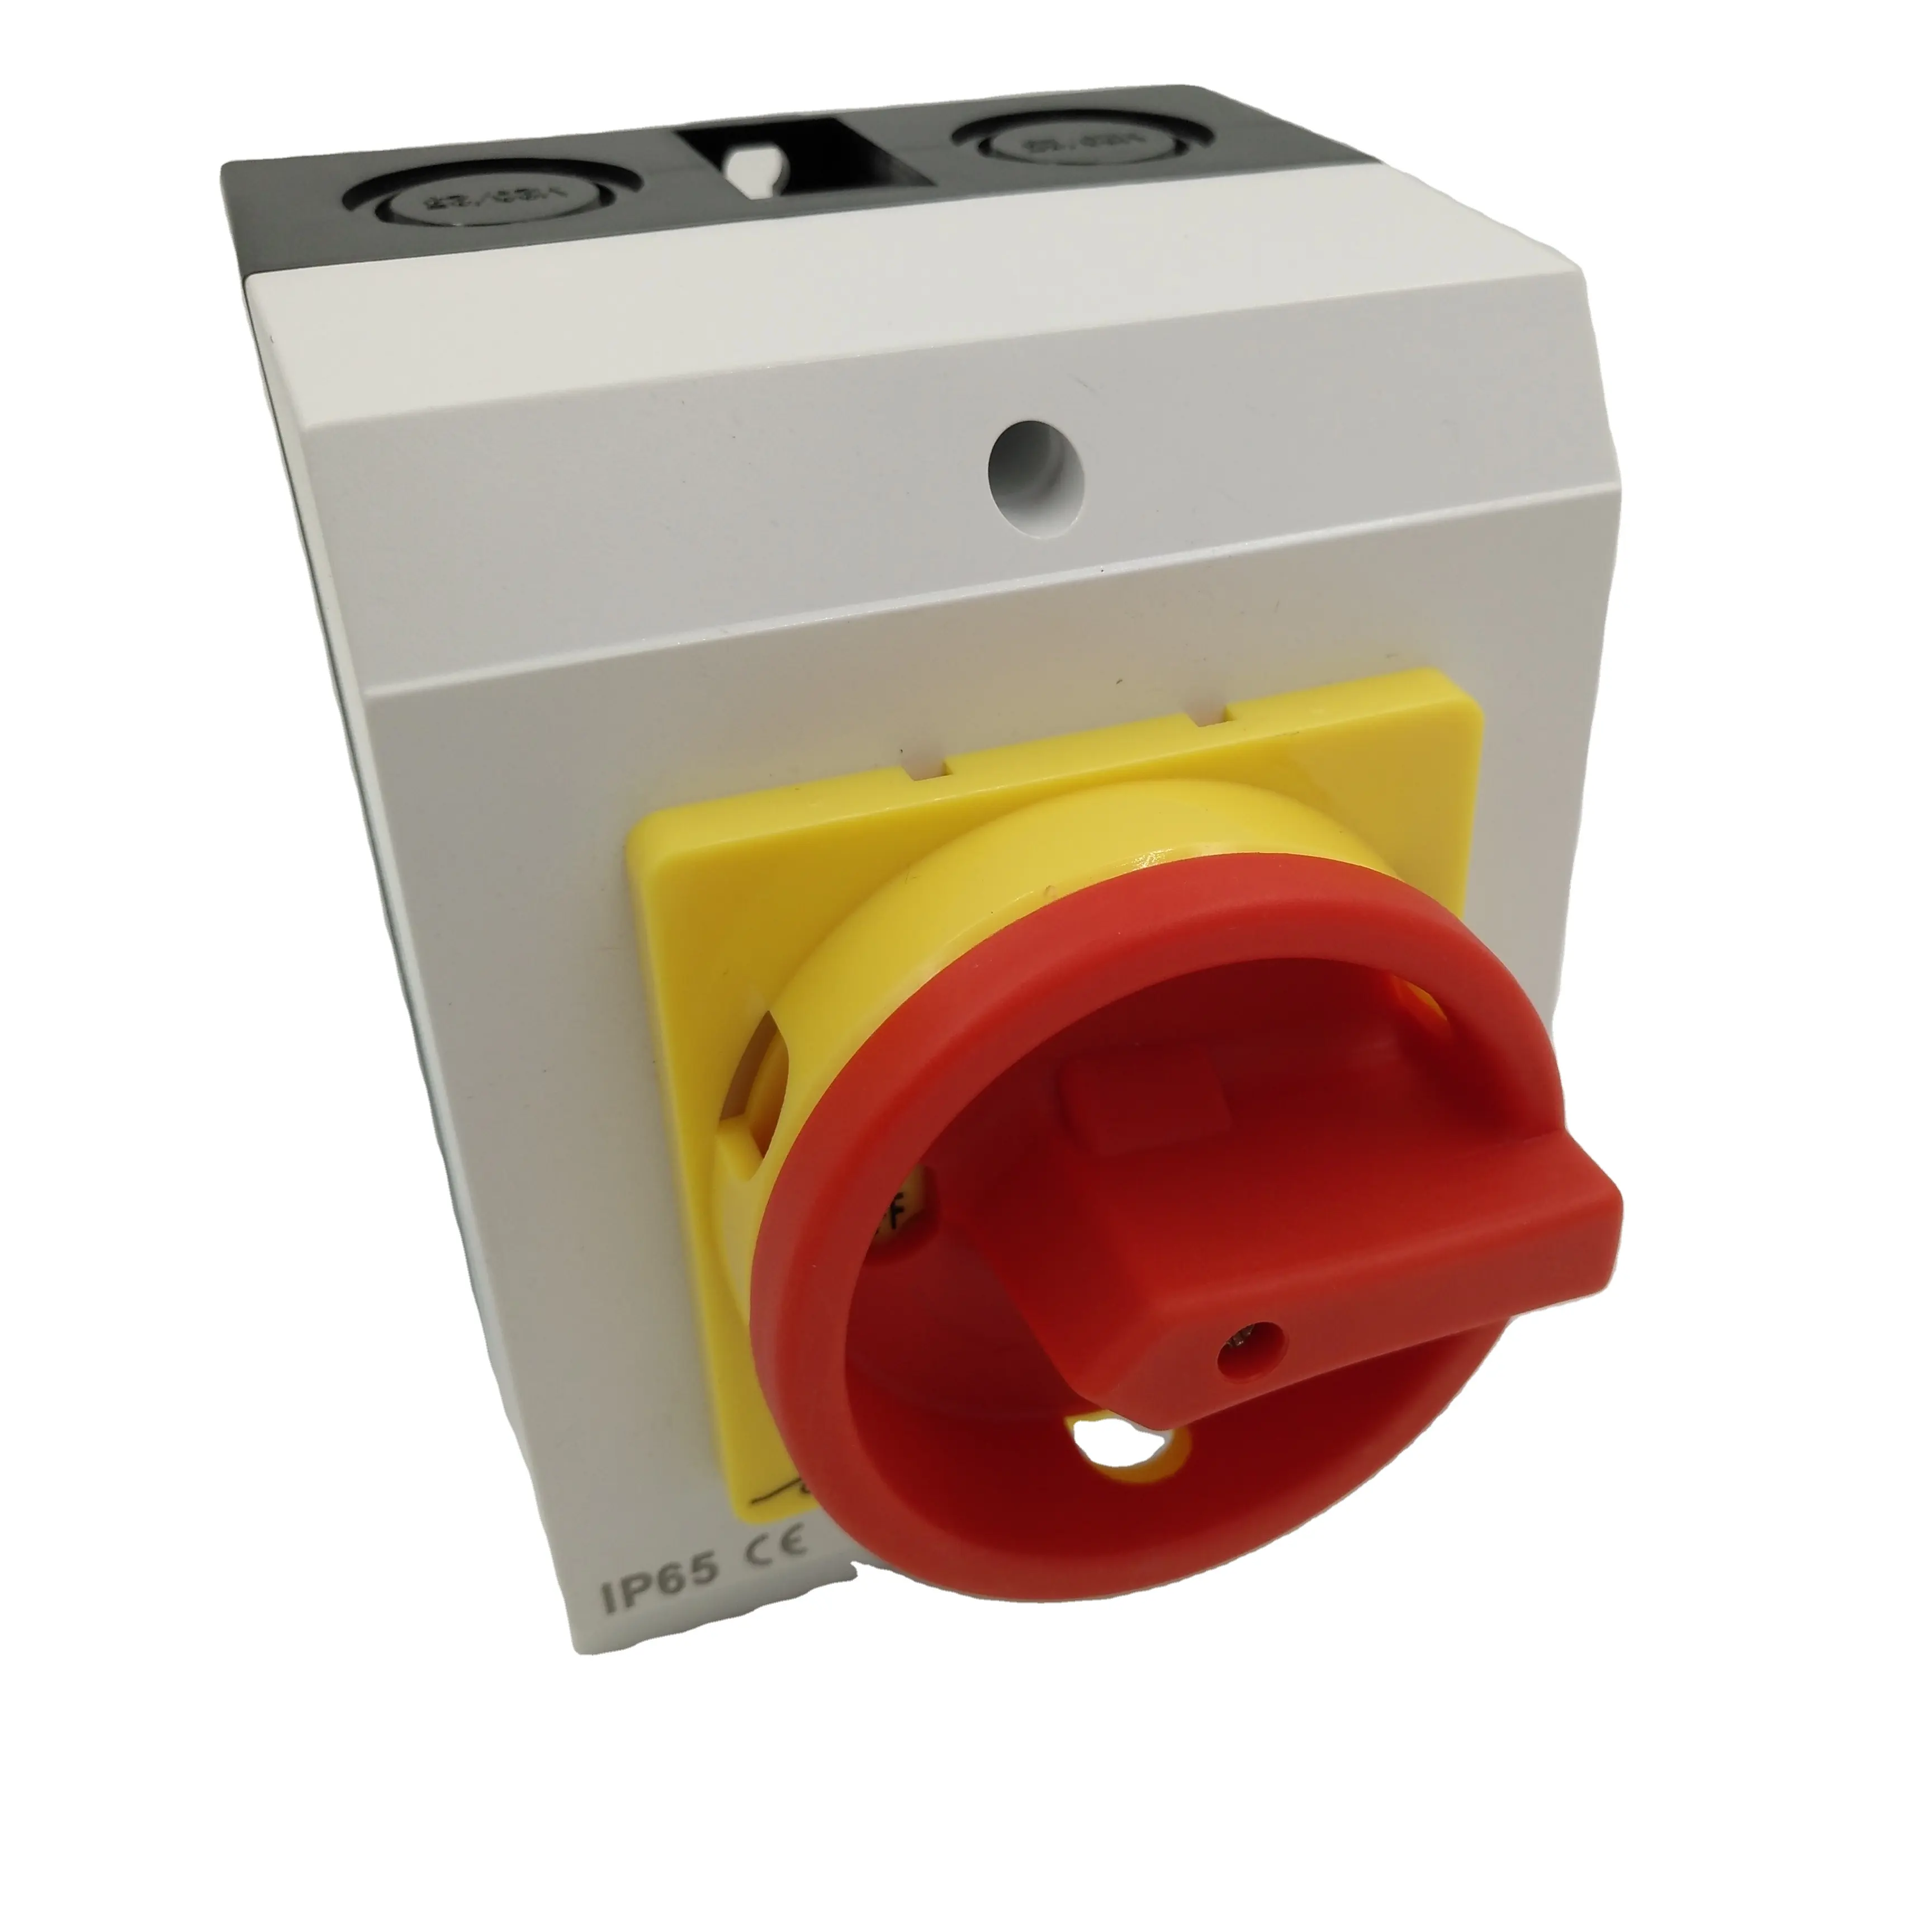 Power cut-off switch SHP Series waterproof isolator switch 3 phase 32a for 3pole main switch